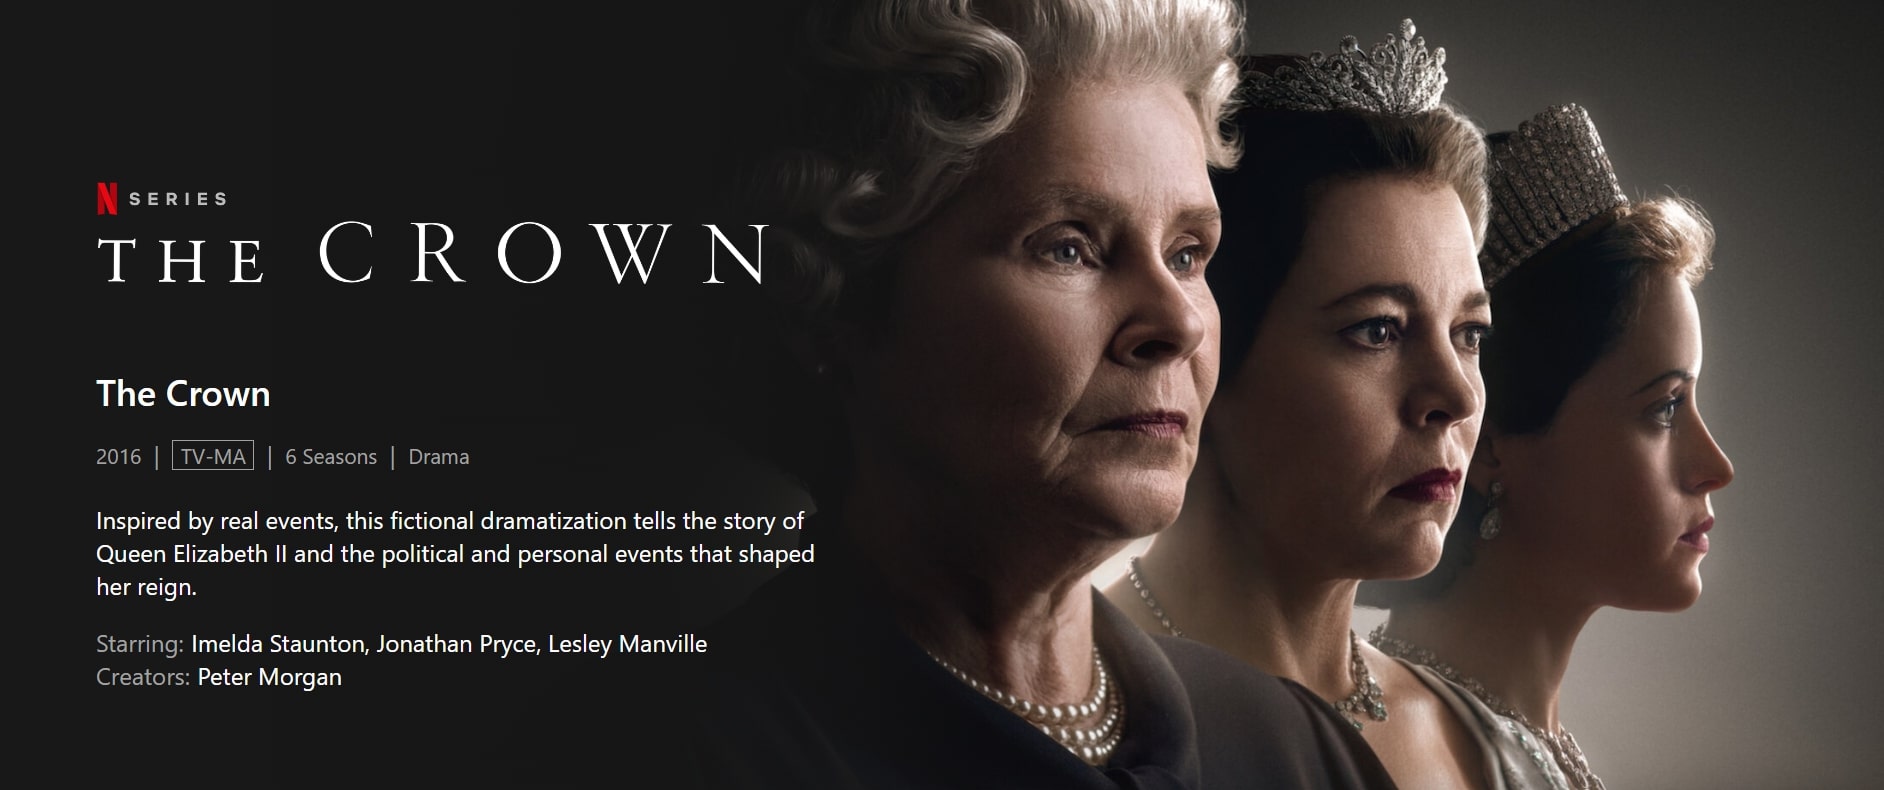 Go to Netflix and search for The Crown